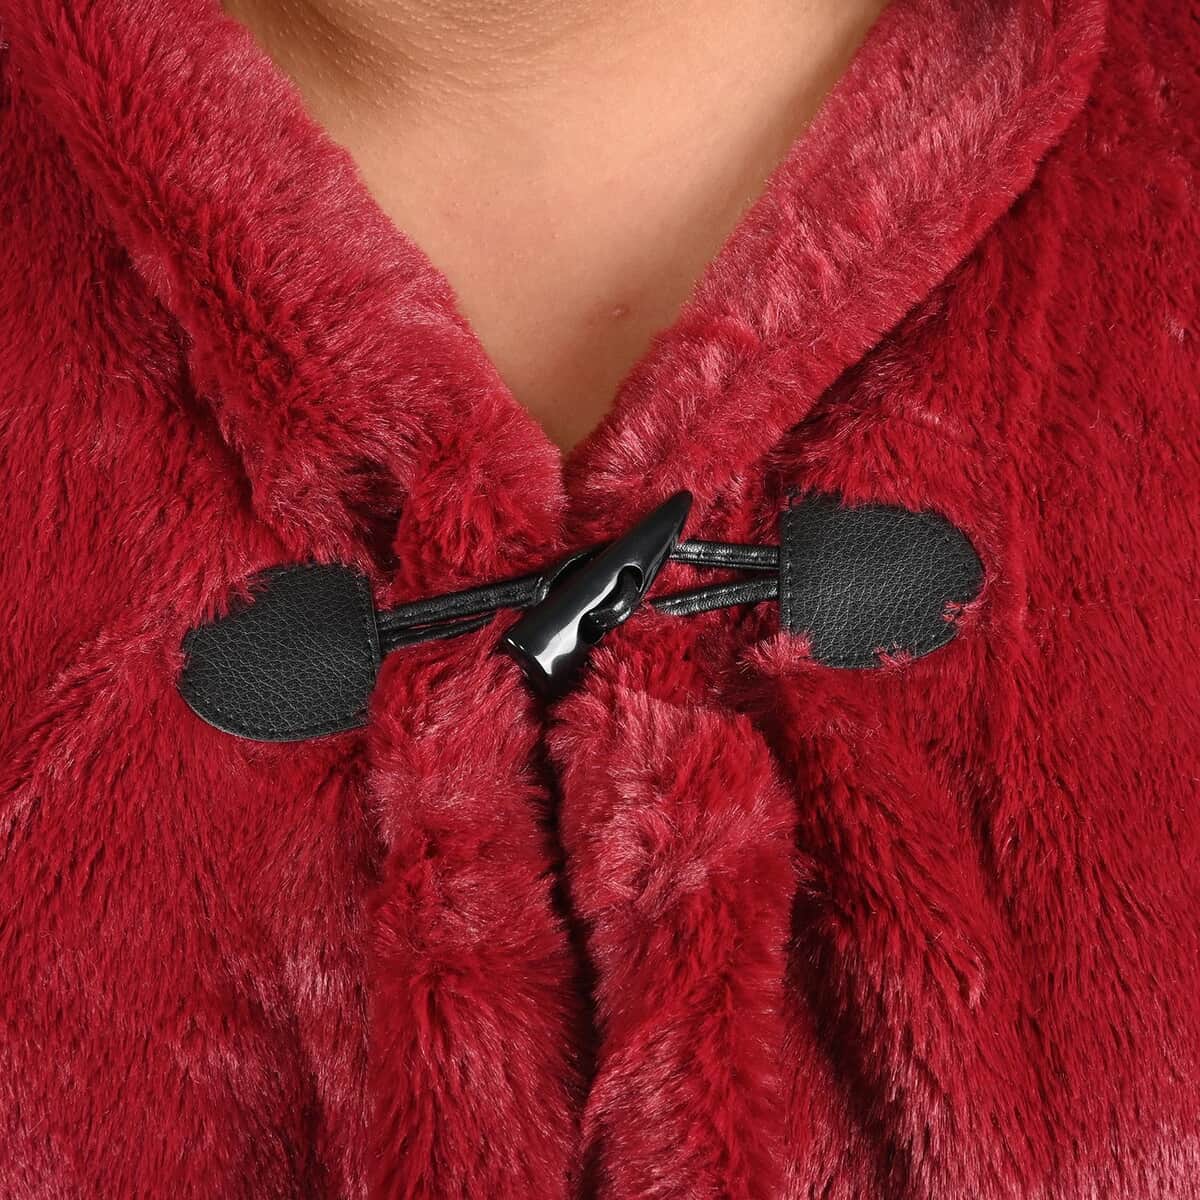 Tamsy Holiday Special Cranberry Faux Fur Ruana with Toggle Button - One Size Fits Most image number 4